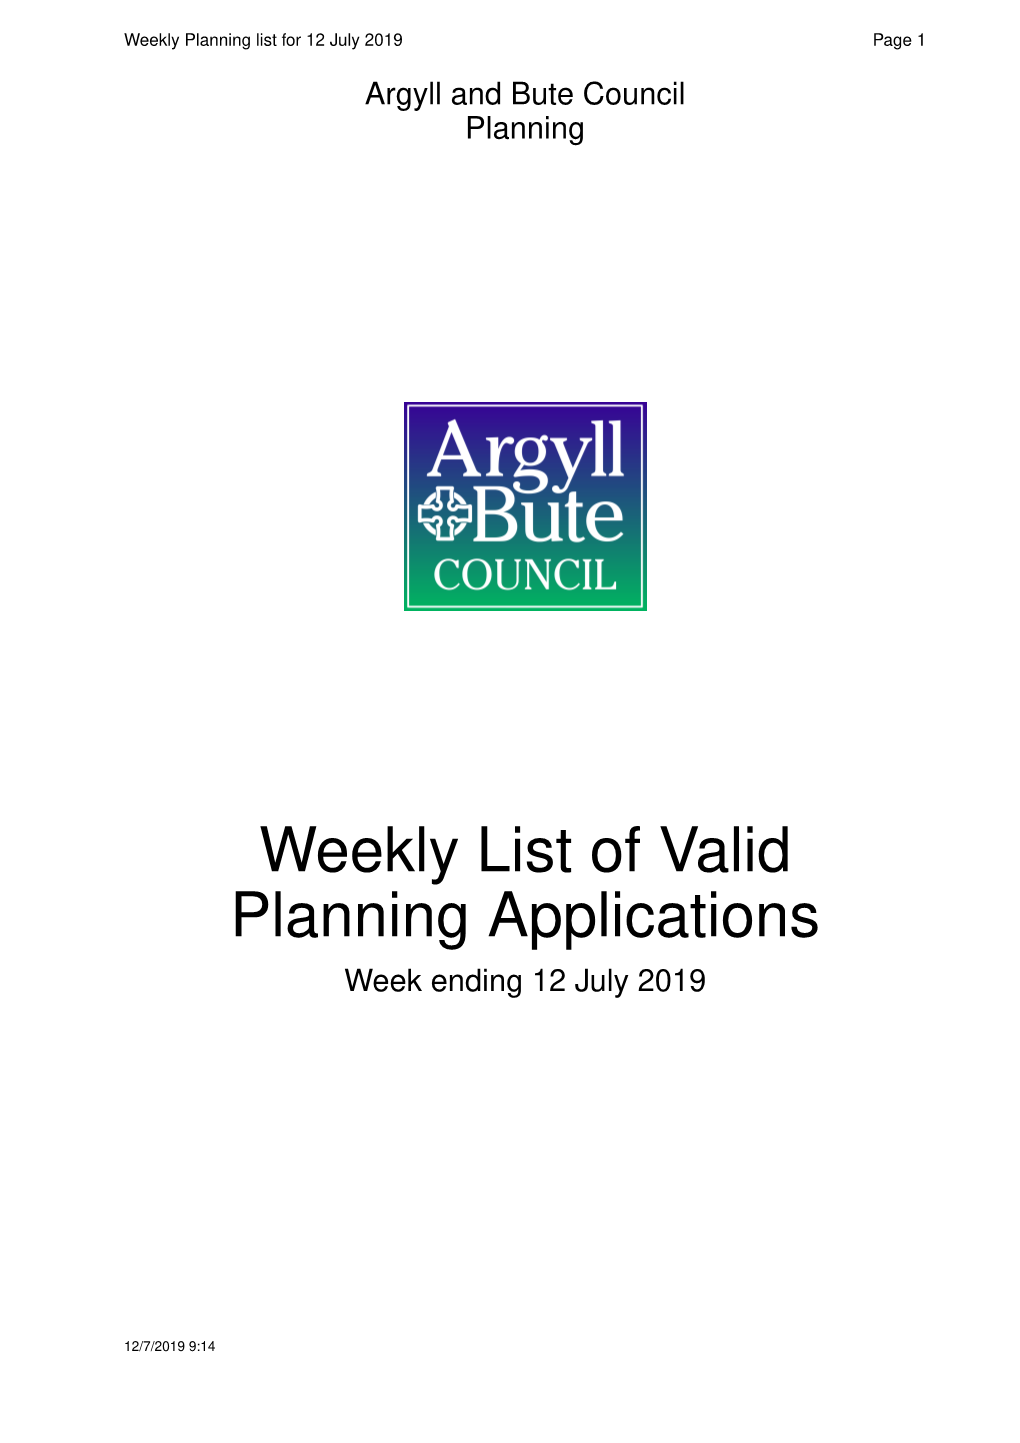 Weekly List of Valid Planning Applications 12Th July 2019.Pdf